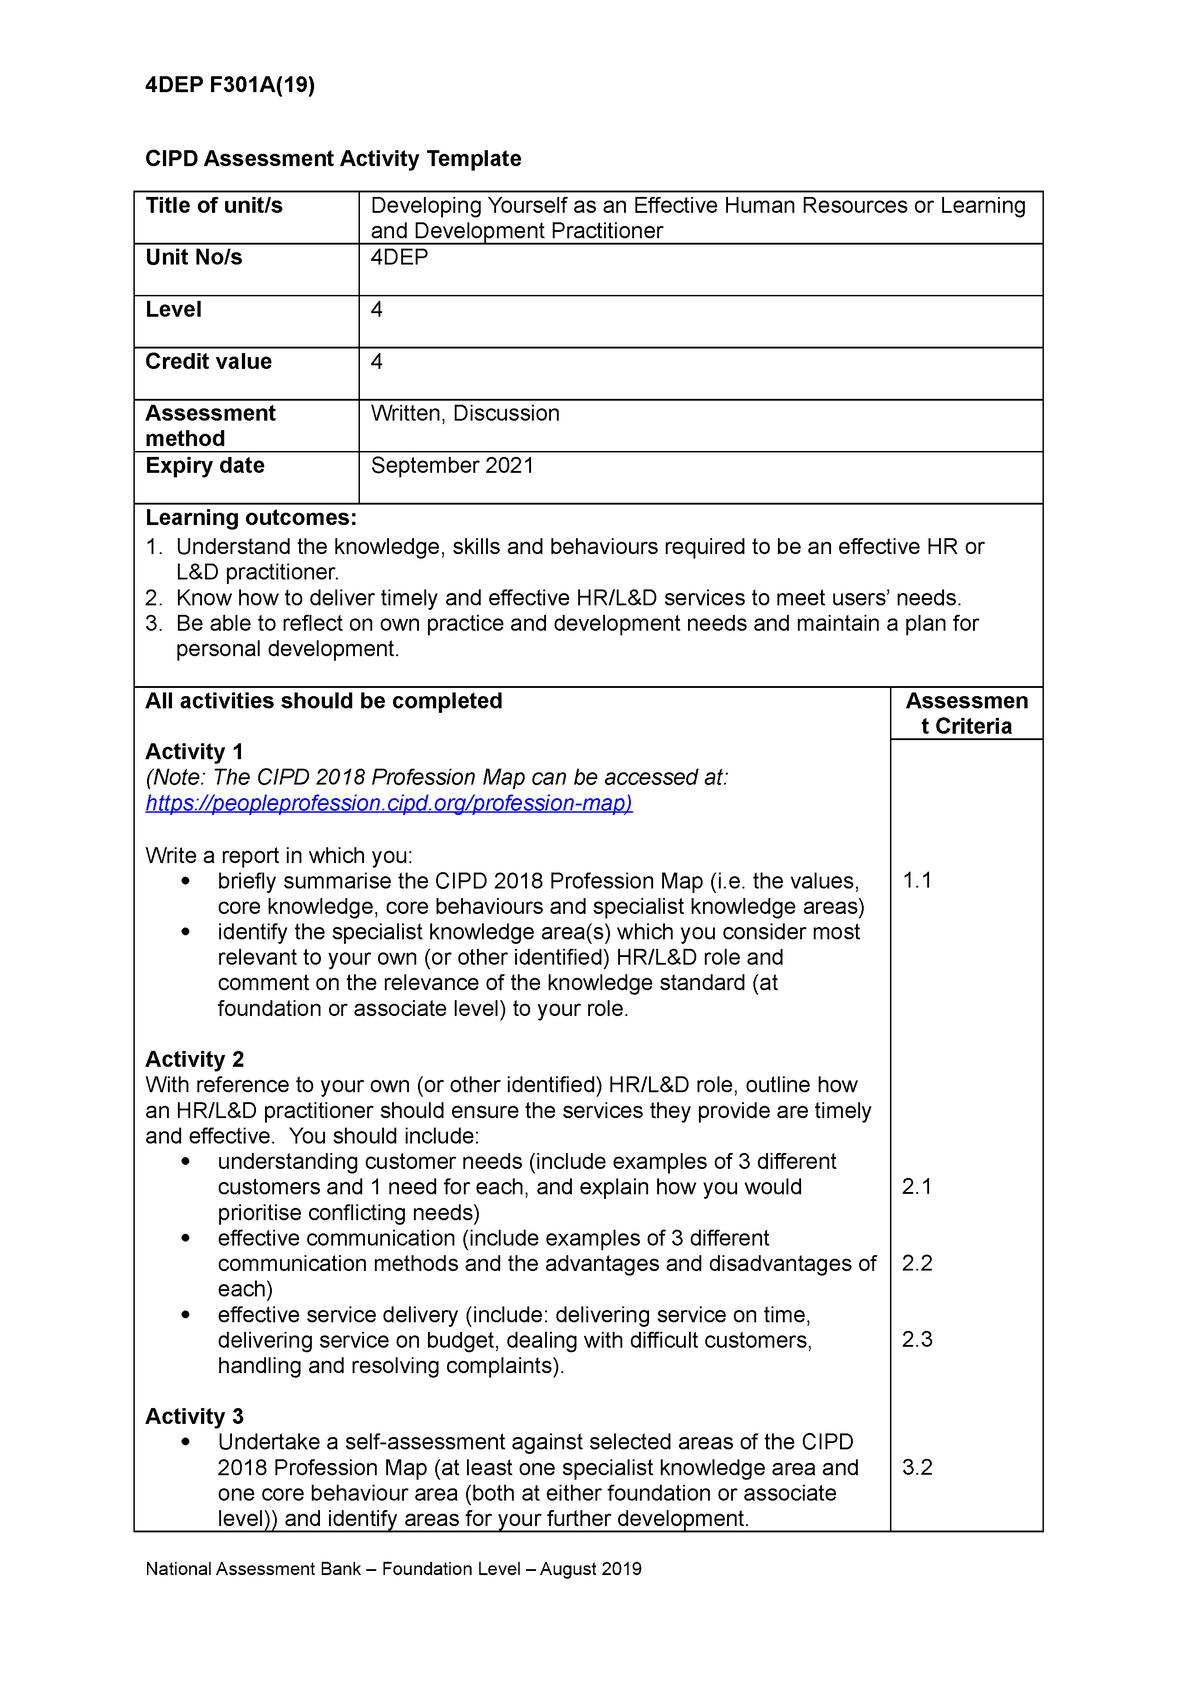 cipd level 5 assignment examples 5co01